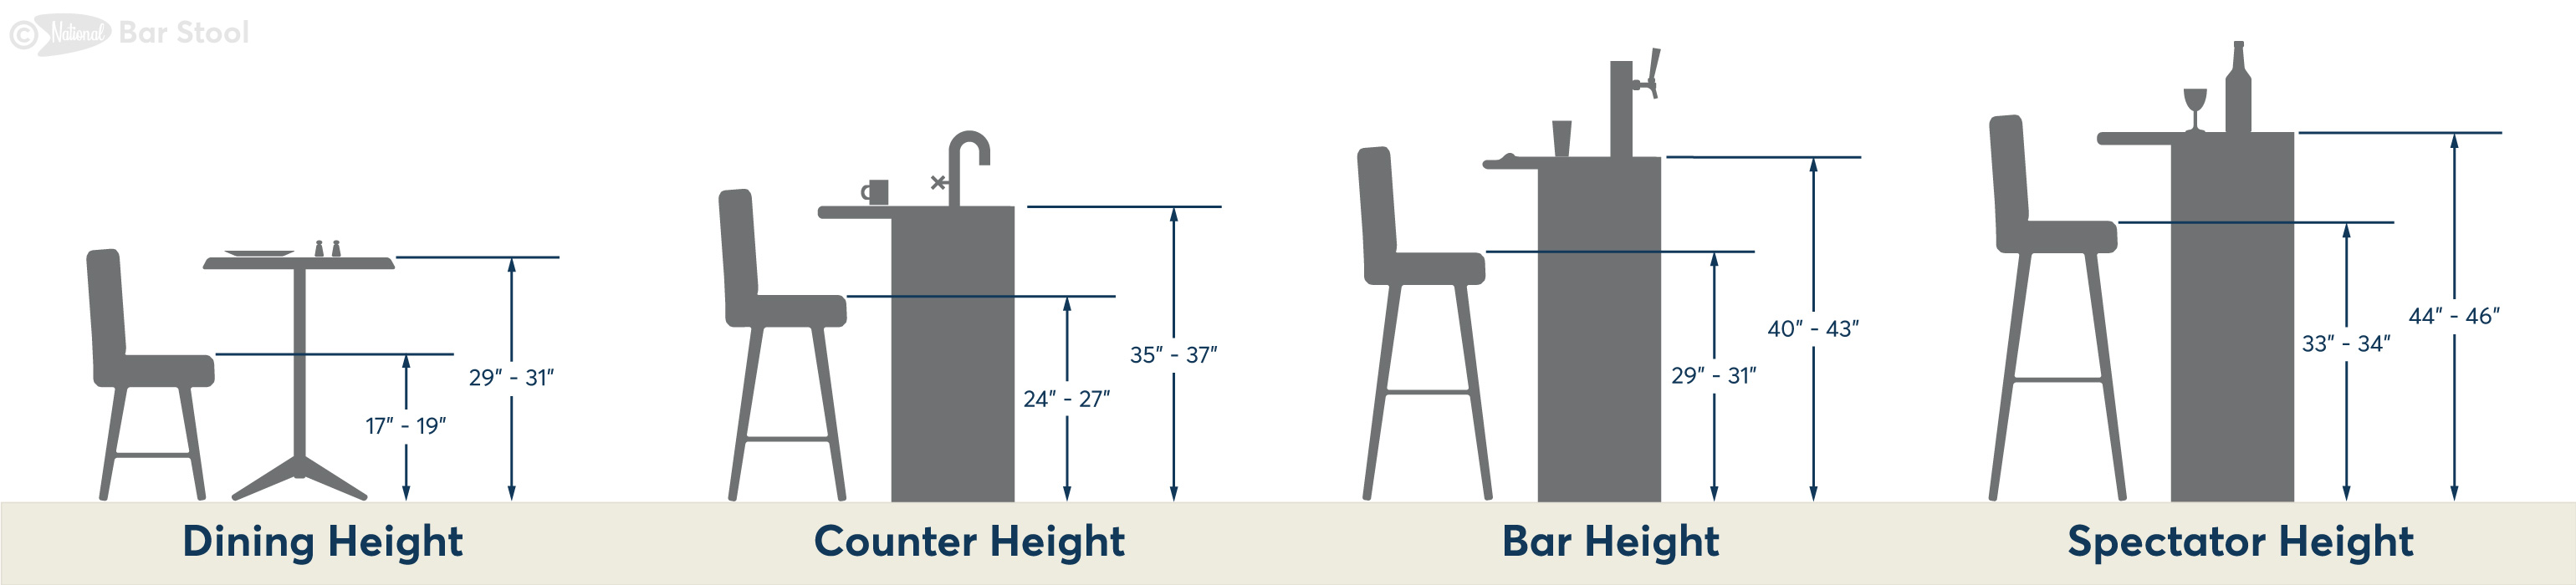 Bar Stool Ing Guide National, How To Choose Bar Stool Height